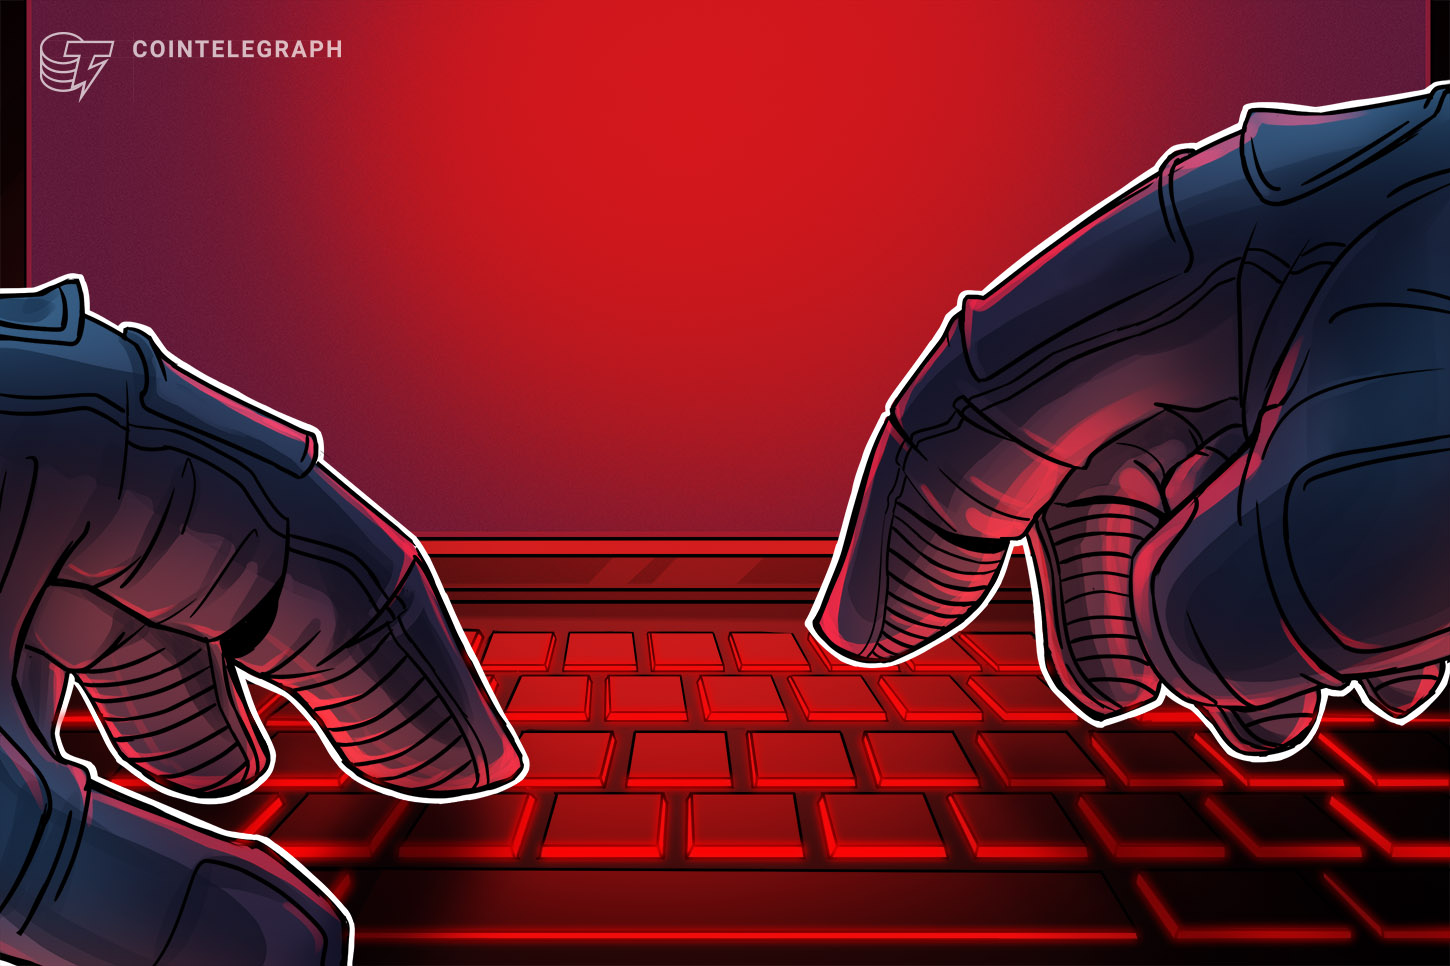 A $1 million BTC bribe results in conspiracy costs for Russian man